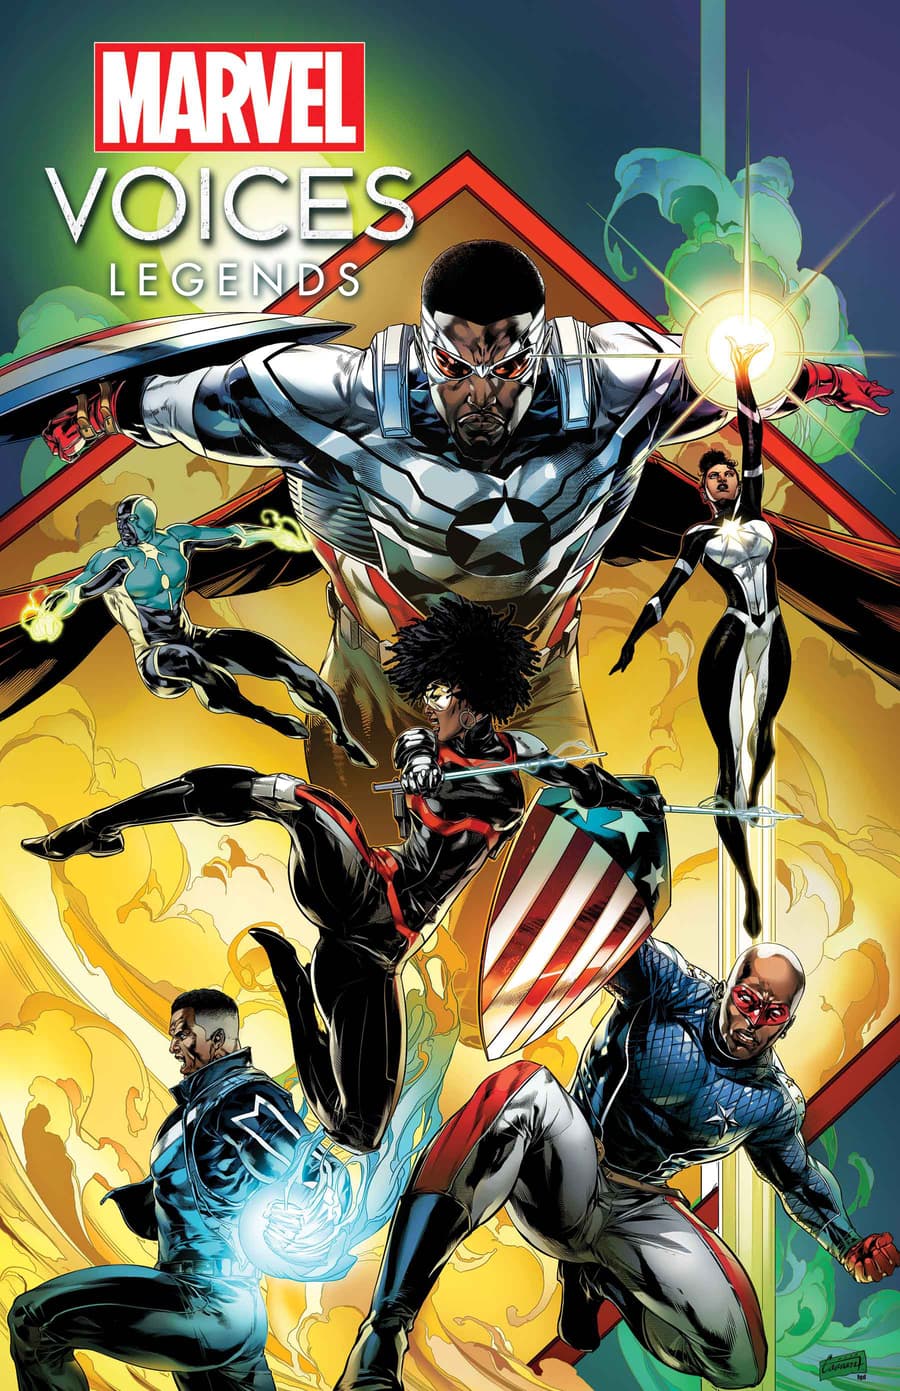 MARVEL'S VOICES: LEGENDS #1 cover by Caanan White